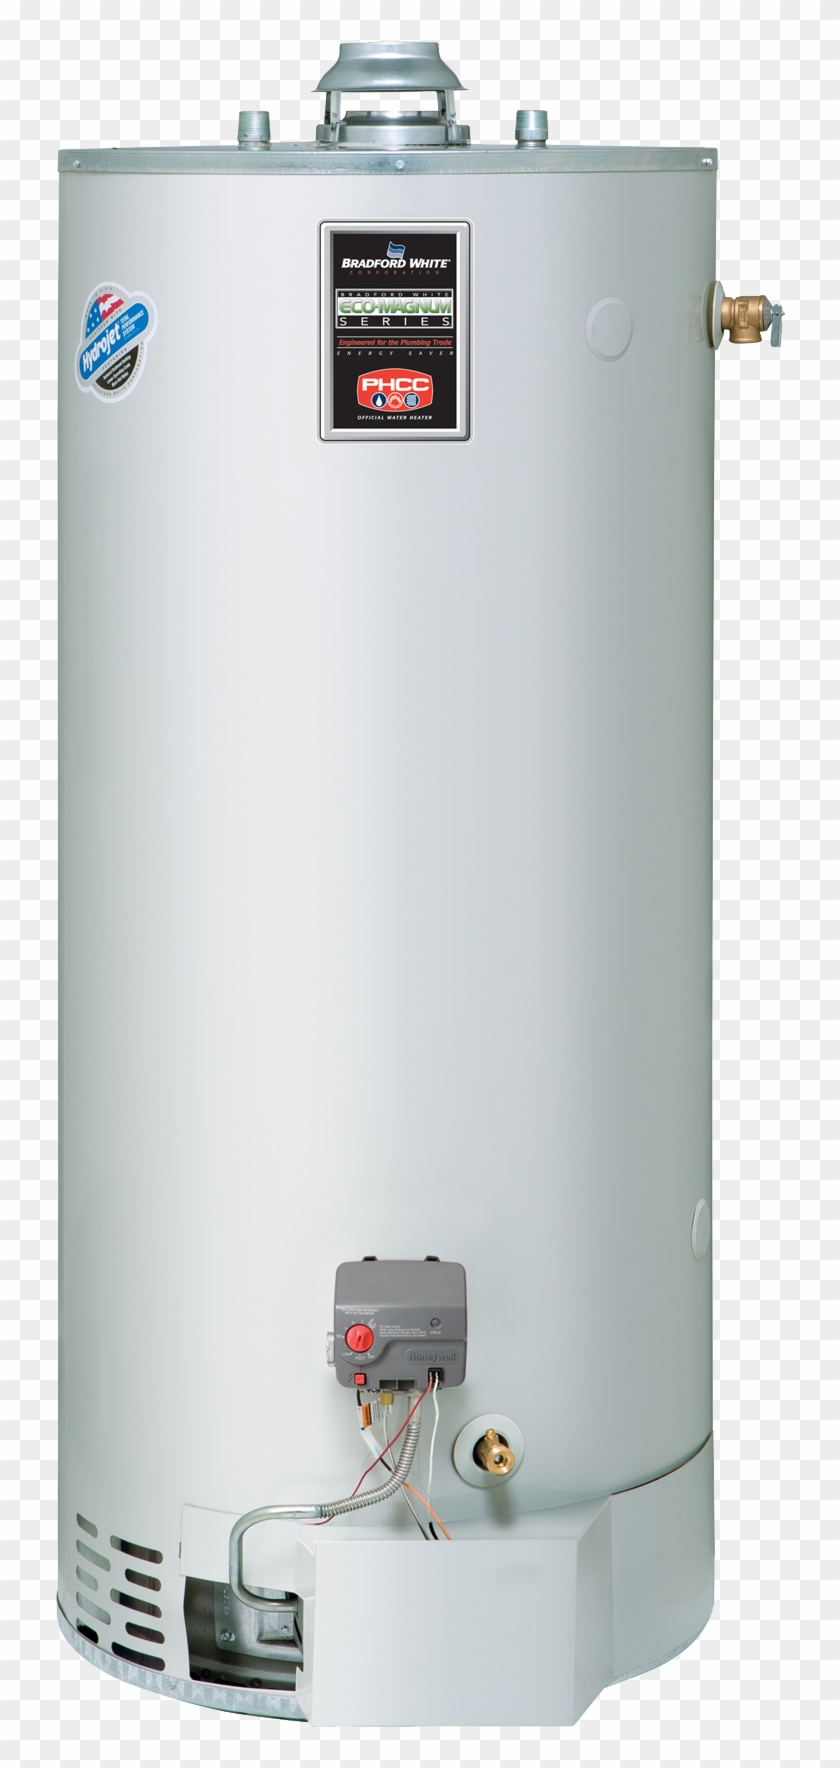 Water Heater Png File - Bradford White 75 Gallon Water Heater Clipart #4671821